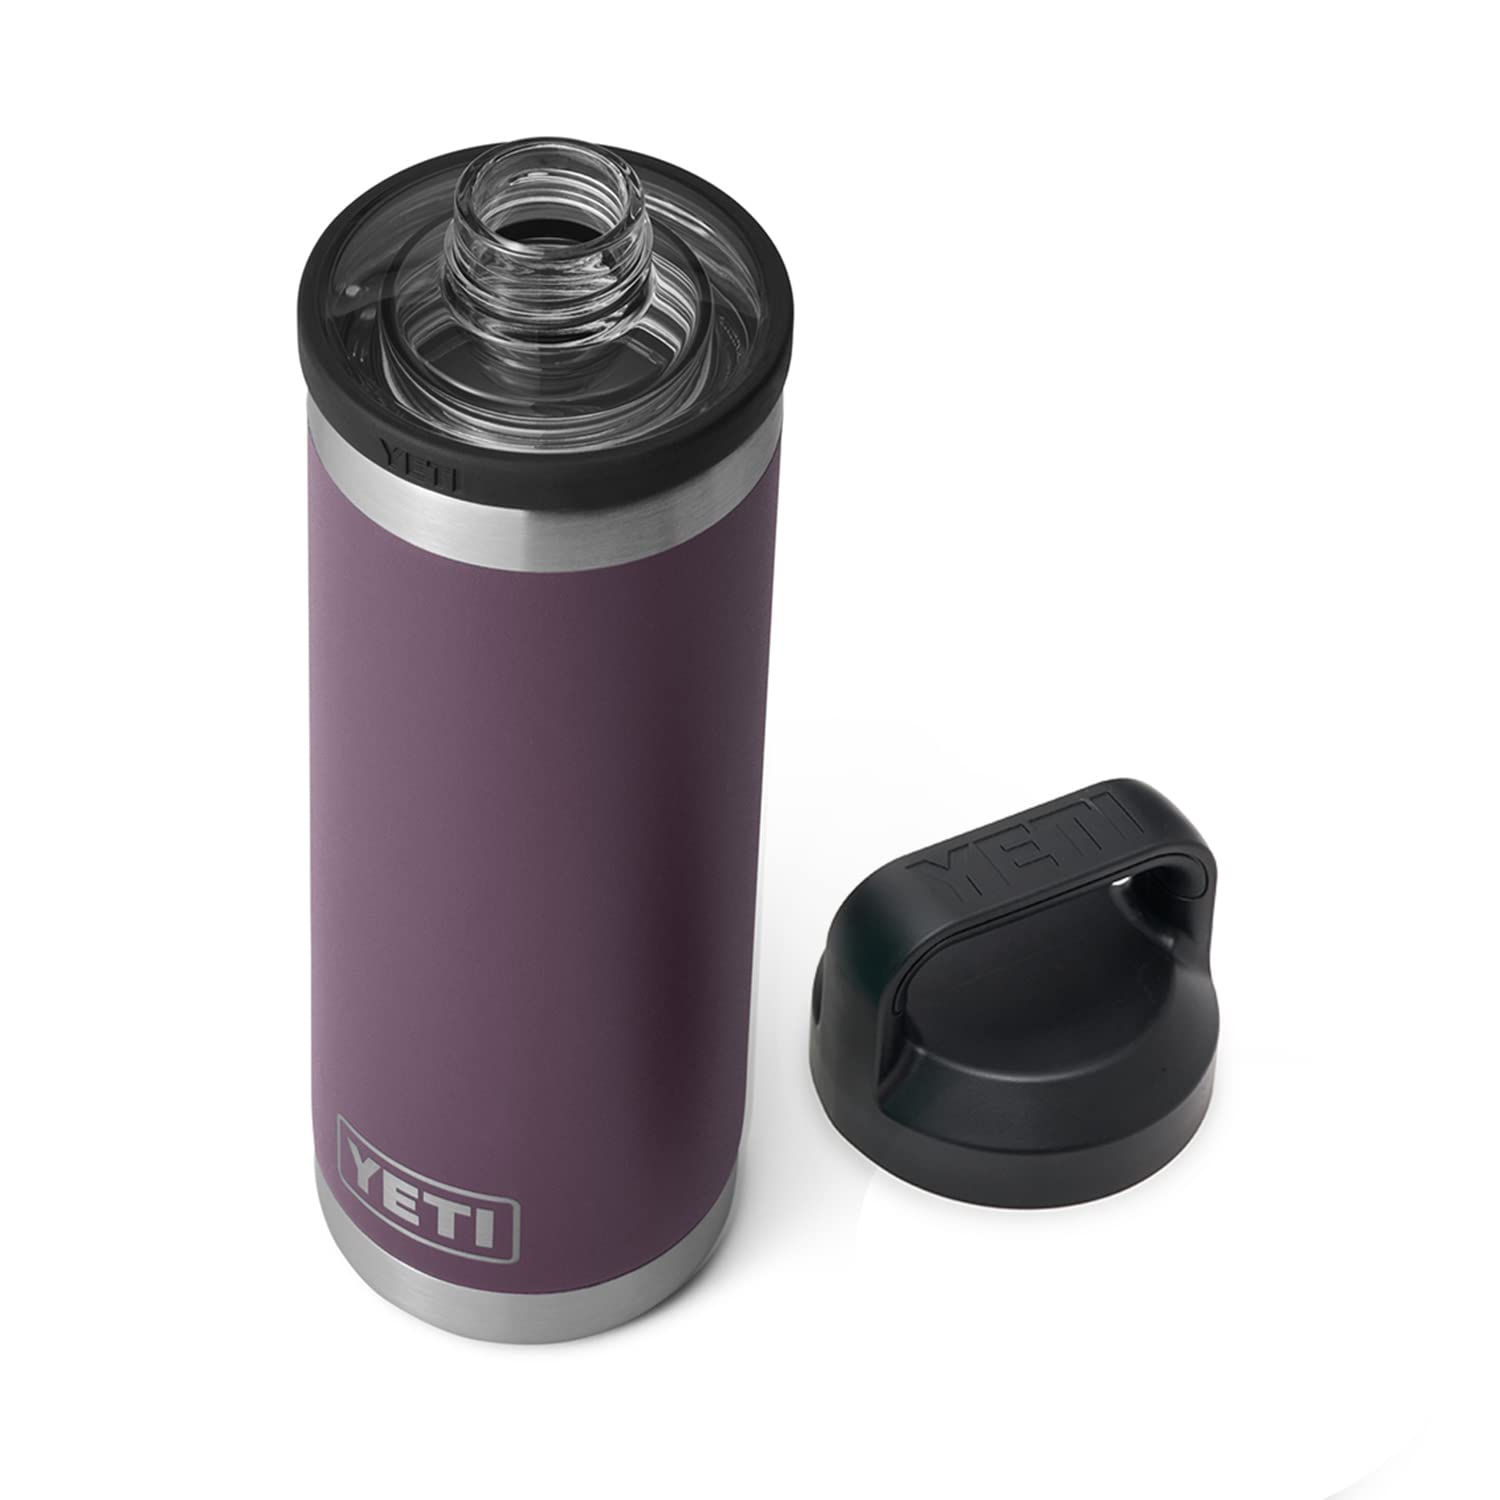 Yeti Rambler One Gallon Jug Nordic Purple Keeps Cold or Hot MagCap  Insulated NEW